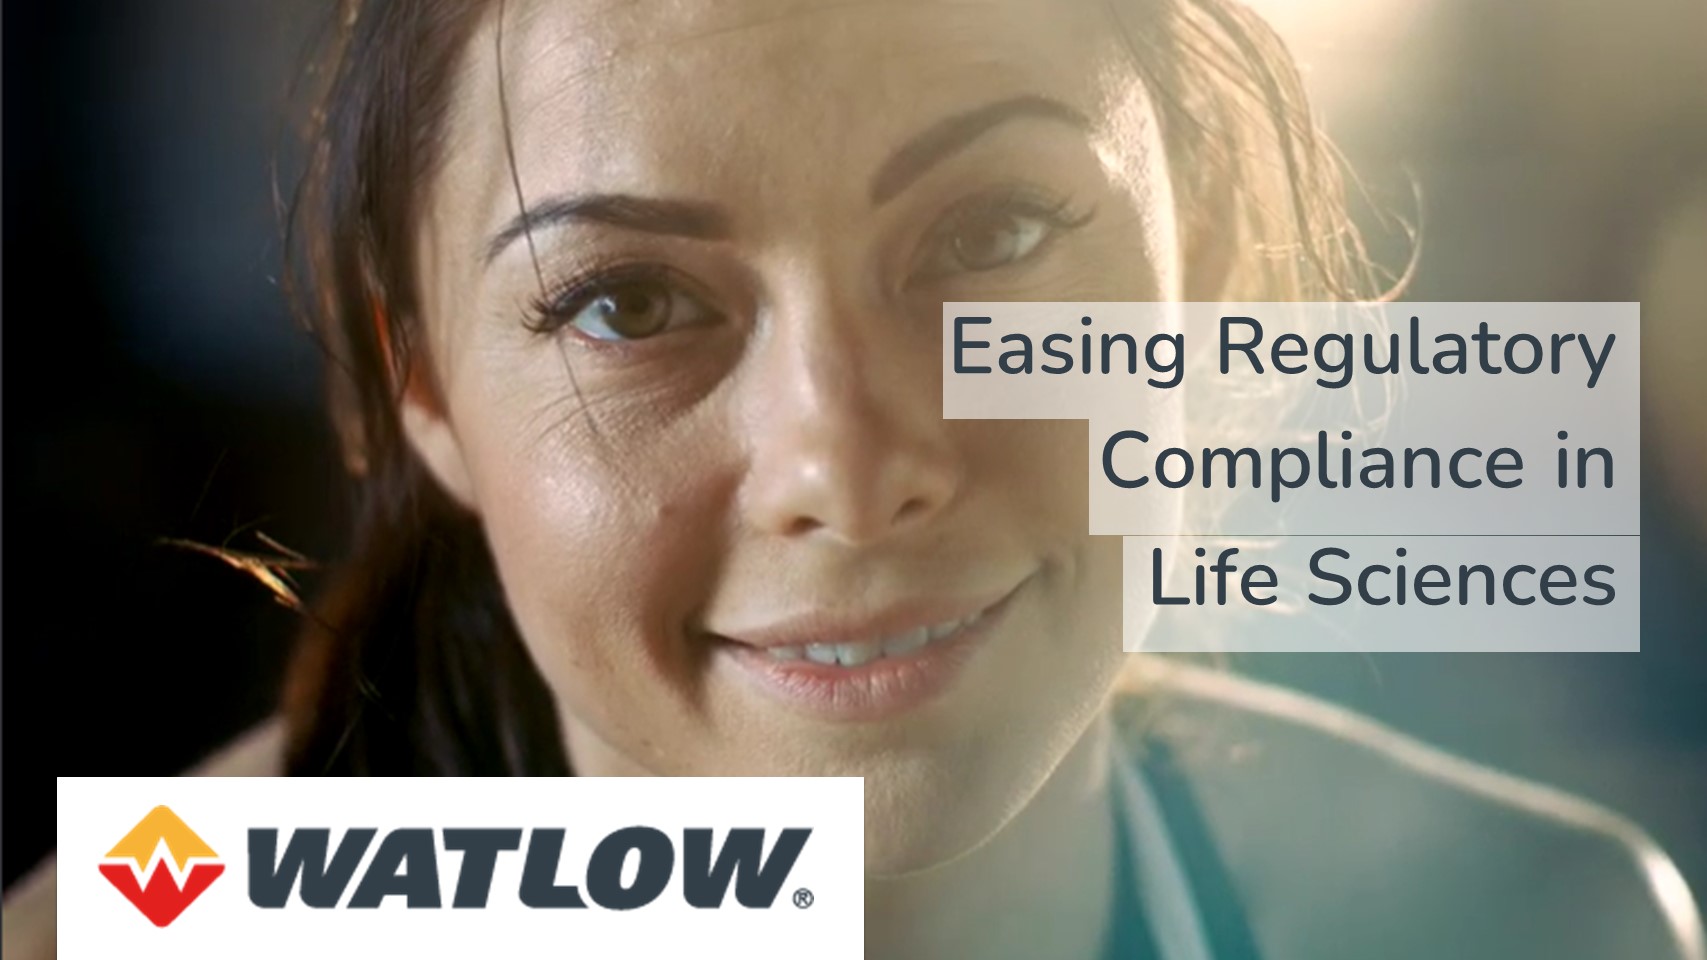 Watlow vision for Life Sciences. We start with compliance.